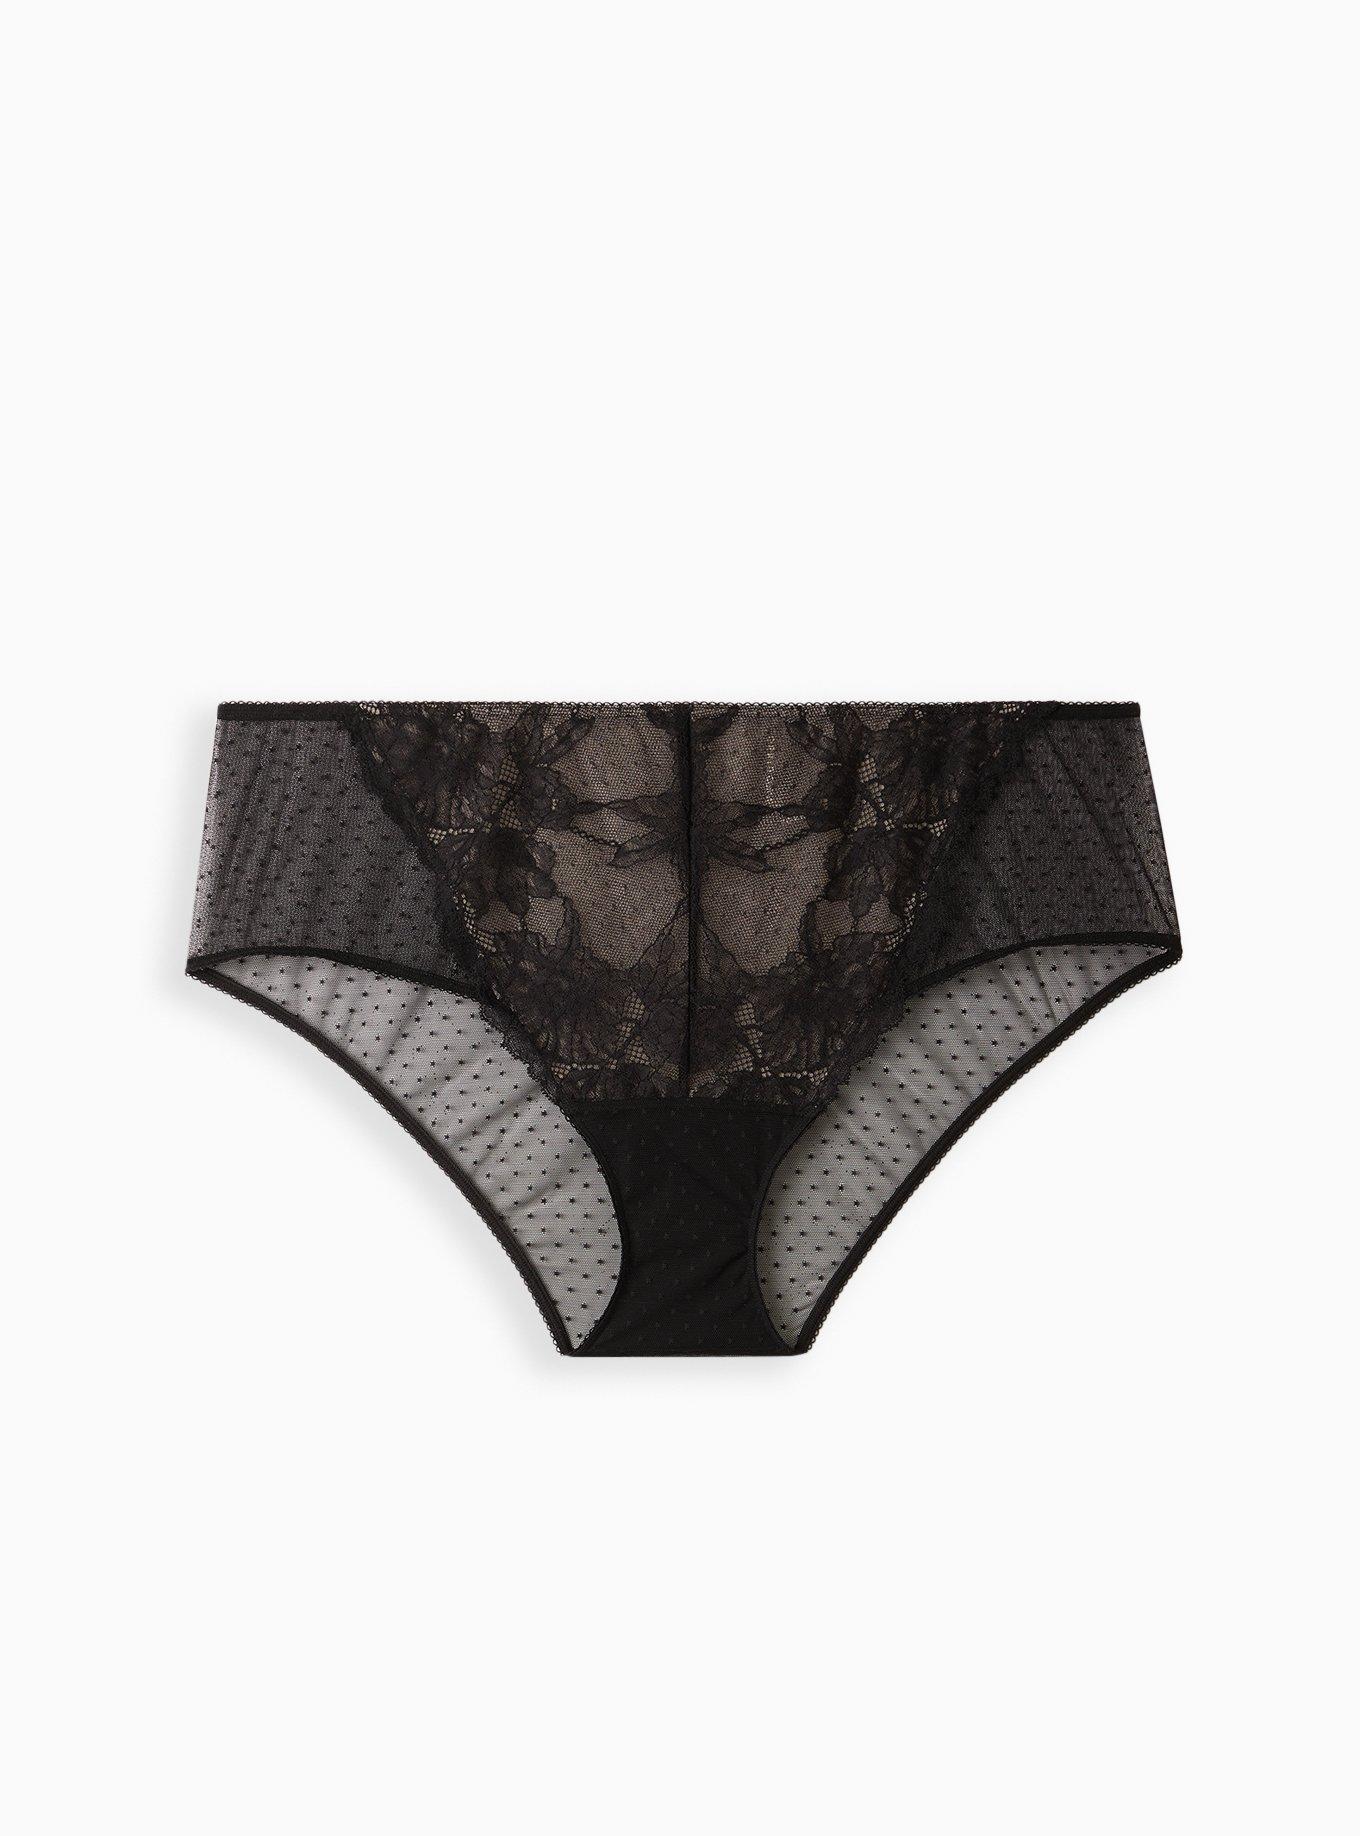 TORRID Tattoo Lace Mid-Rise Hipster Panty